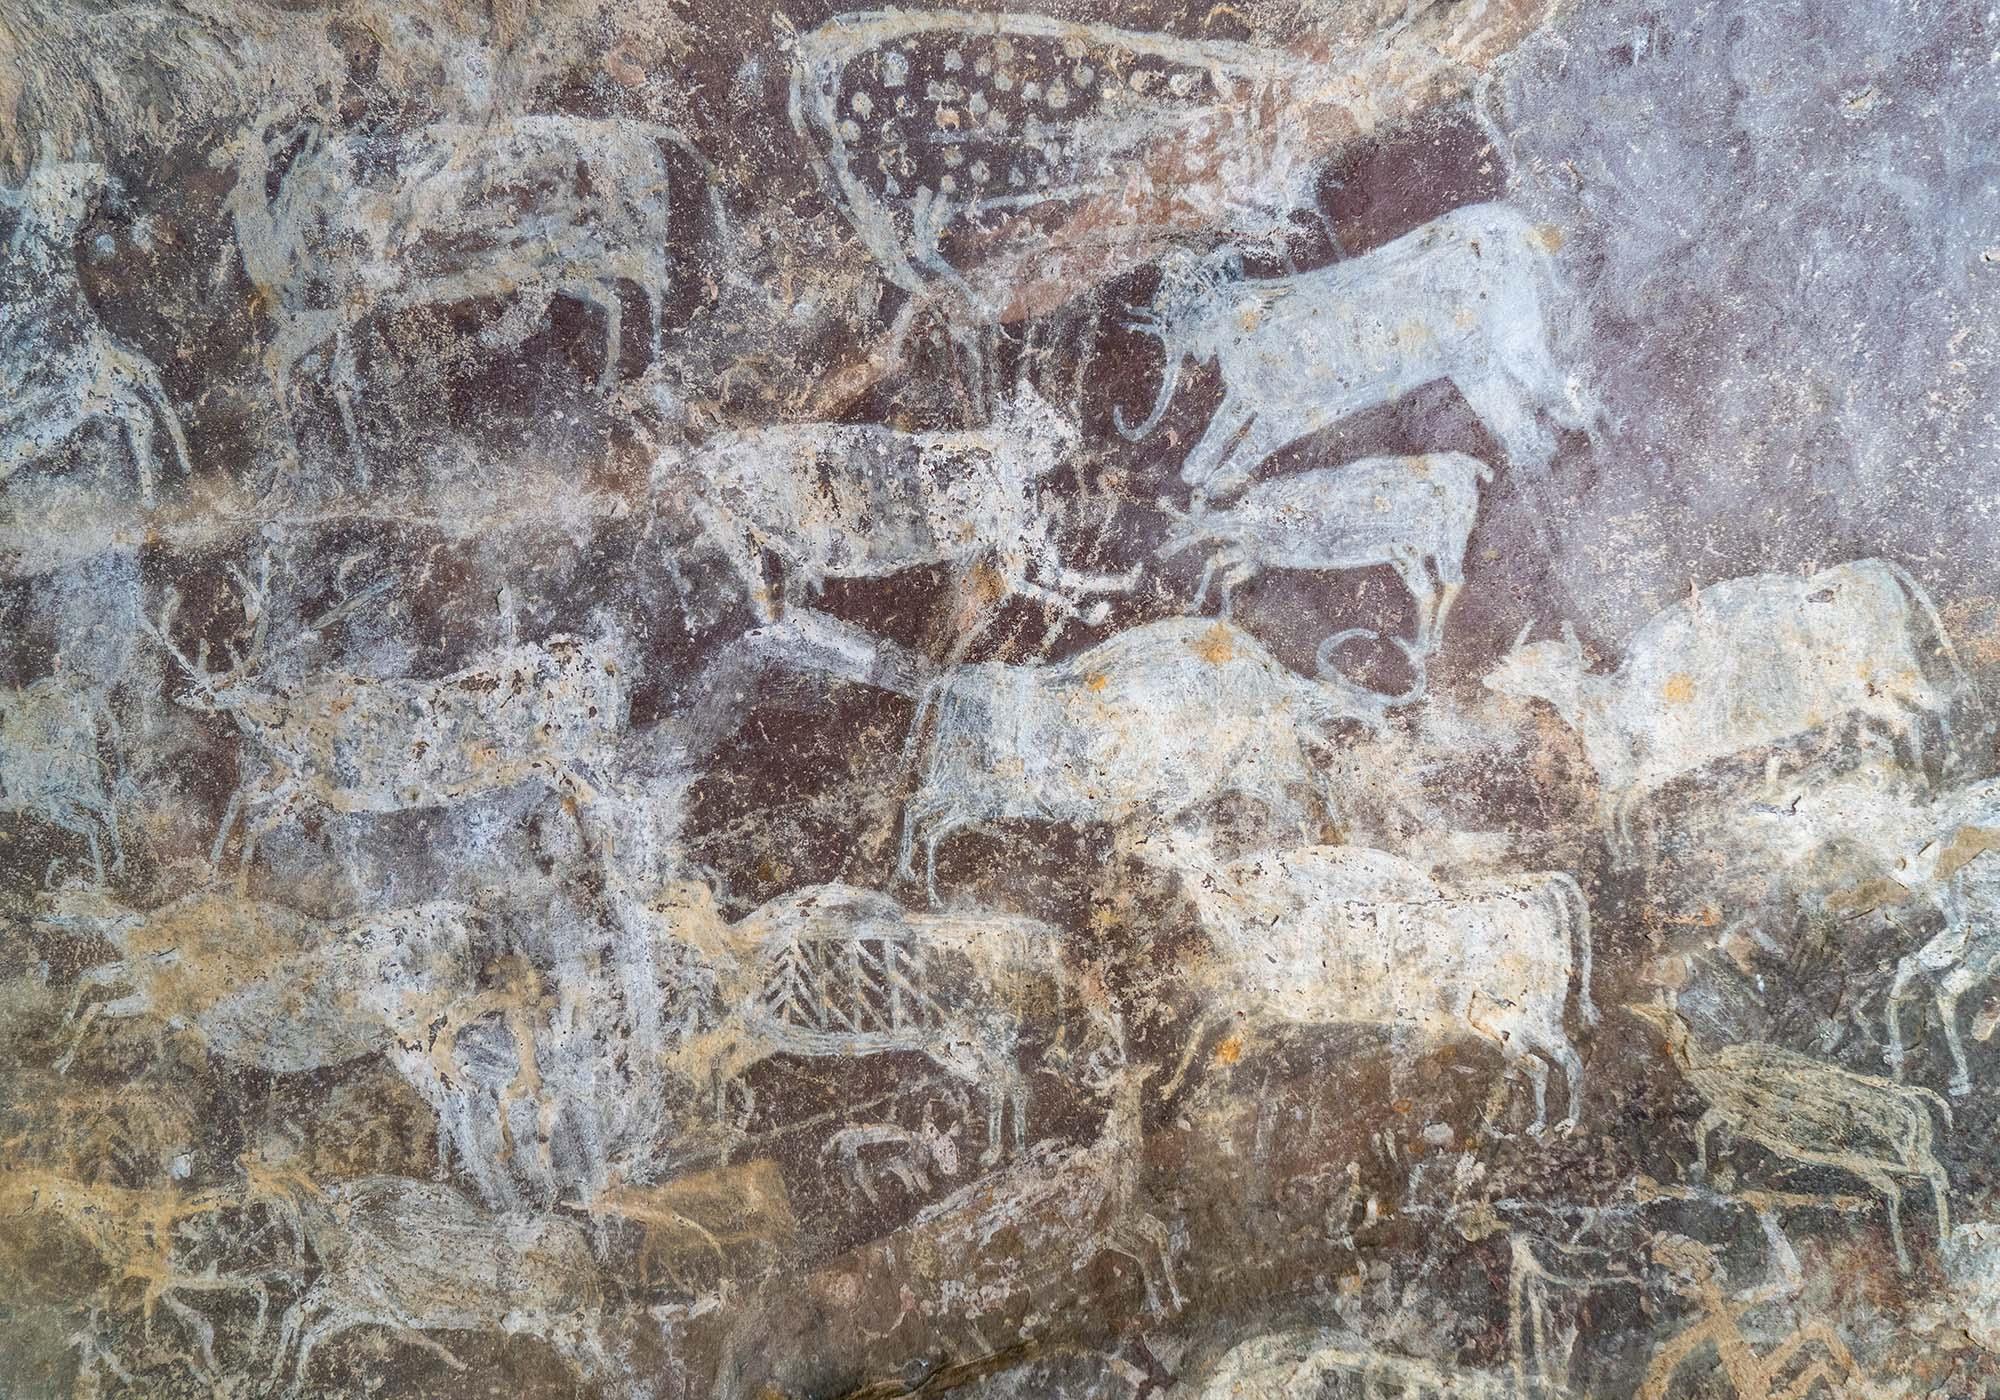 Representations of animals are common in the rock paintings, along with scenes of hunting or war. – © Michael Turtle